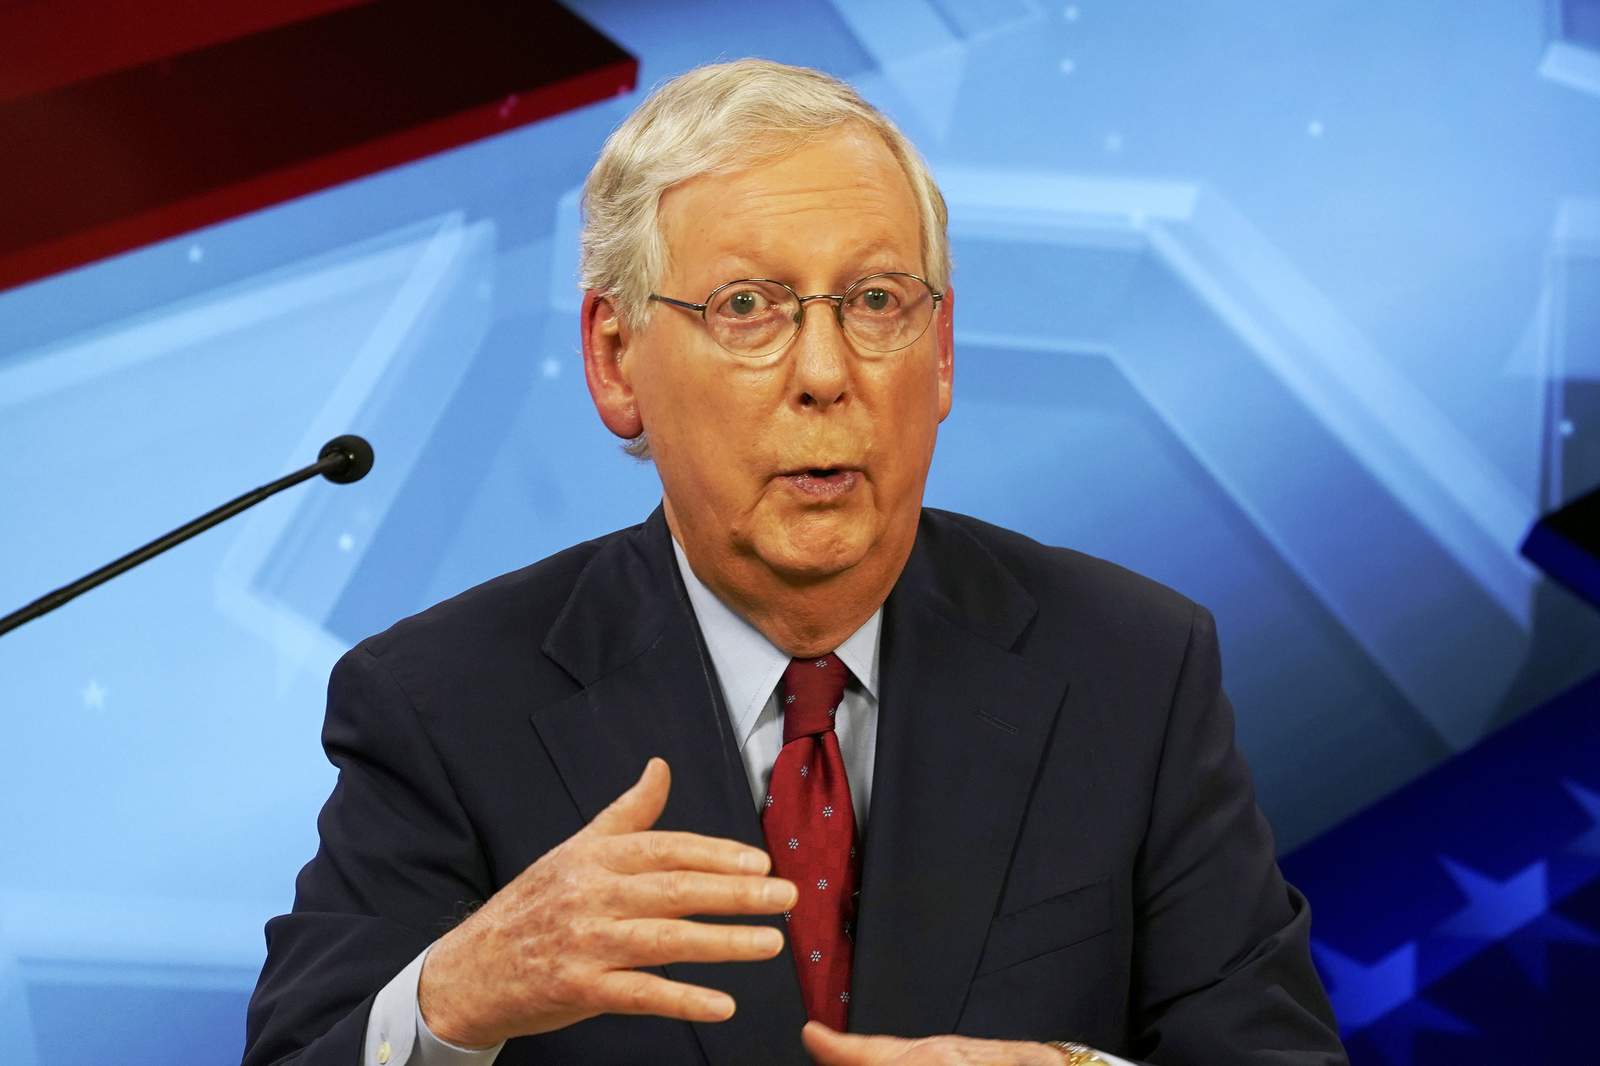 McConnell slates October revote on COVID-19 relief plan